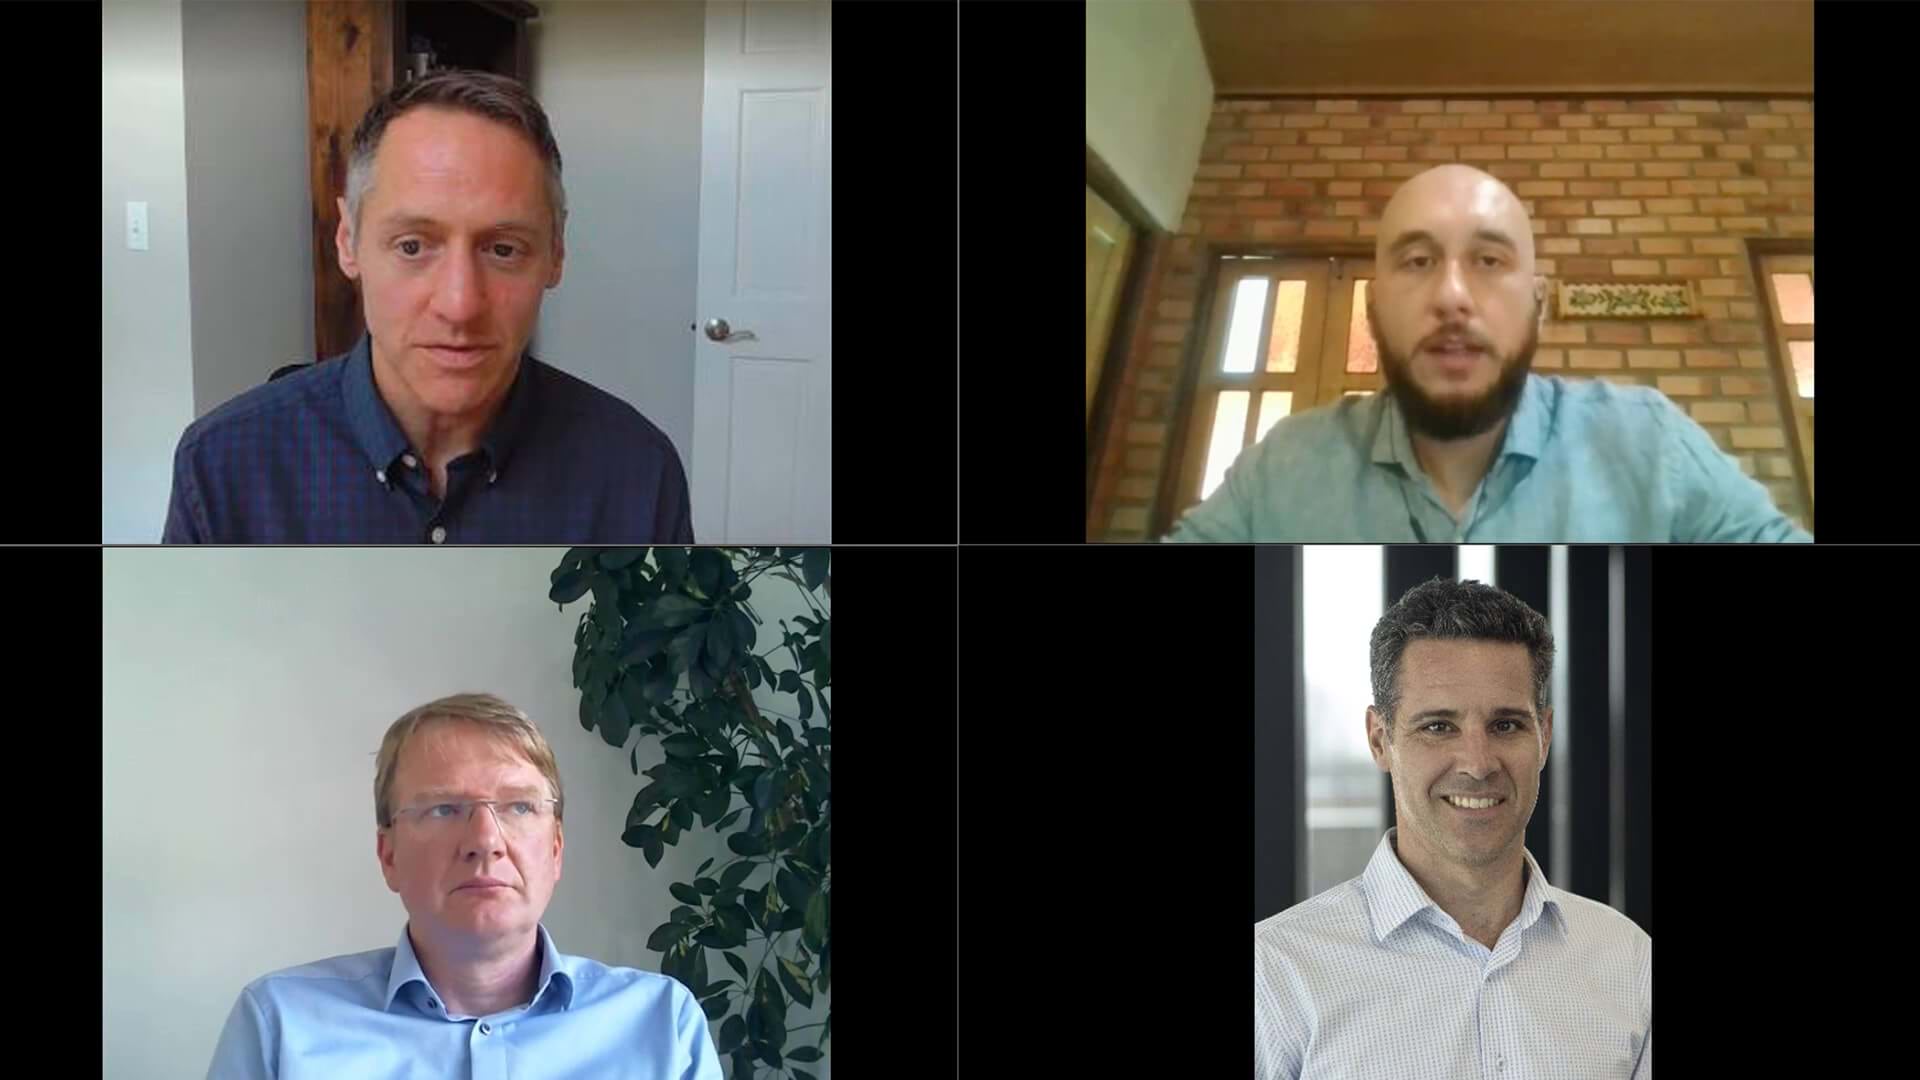 Four webcast presenters speak about the outputs of nature